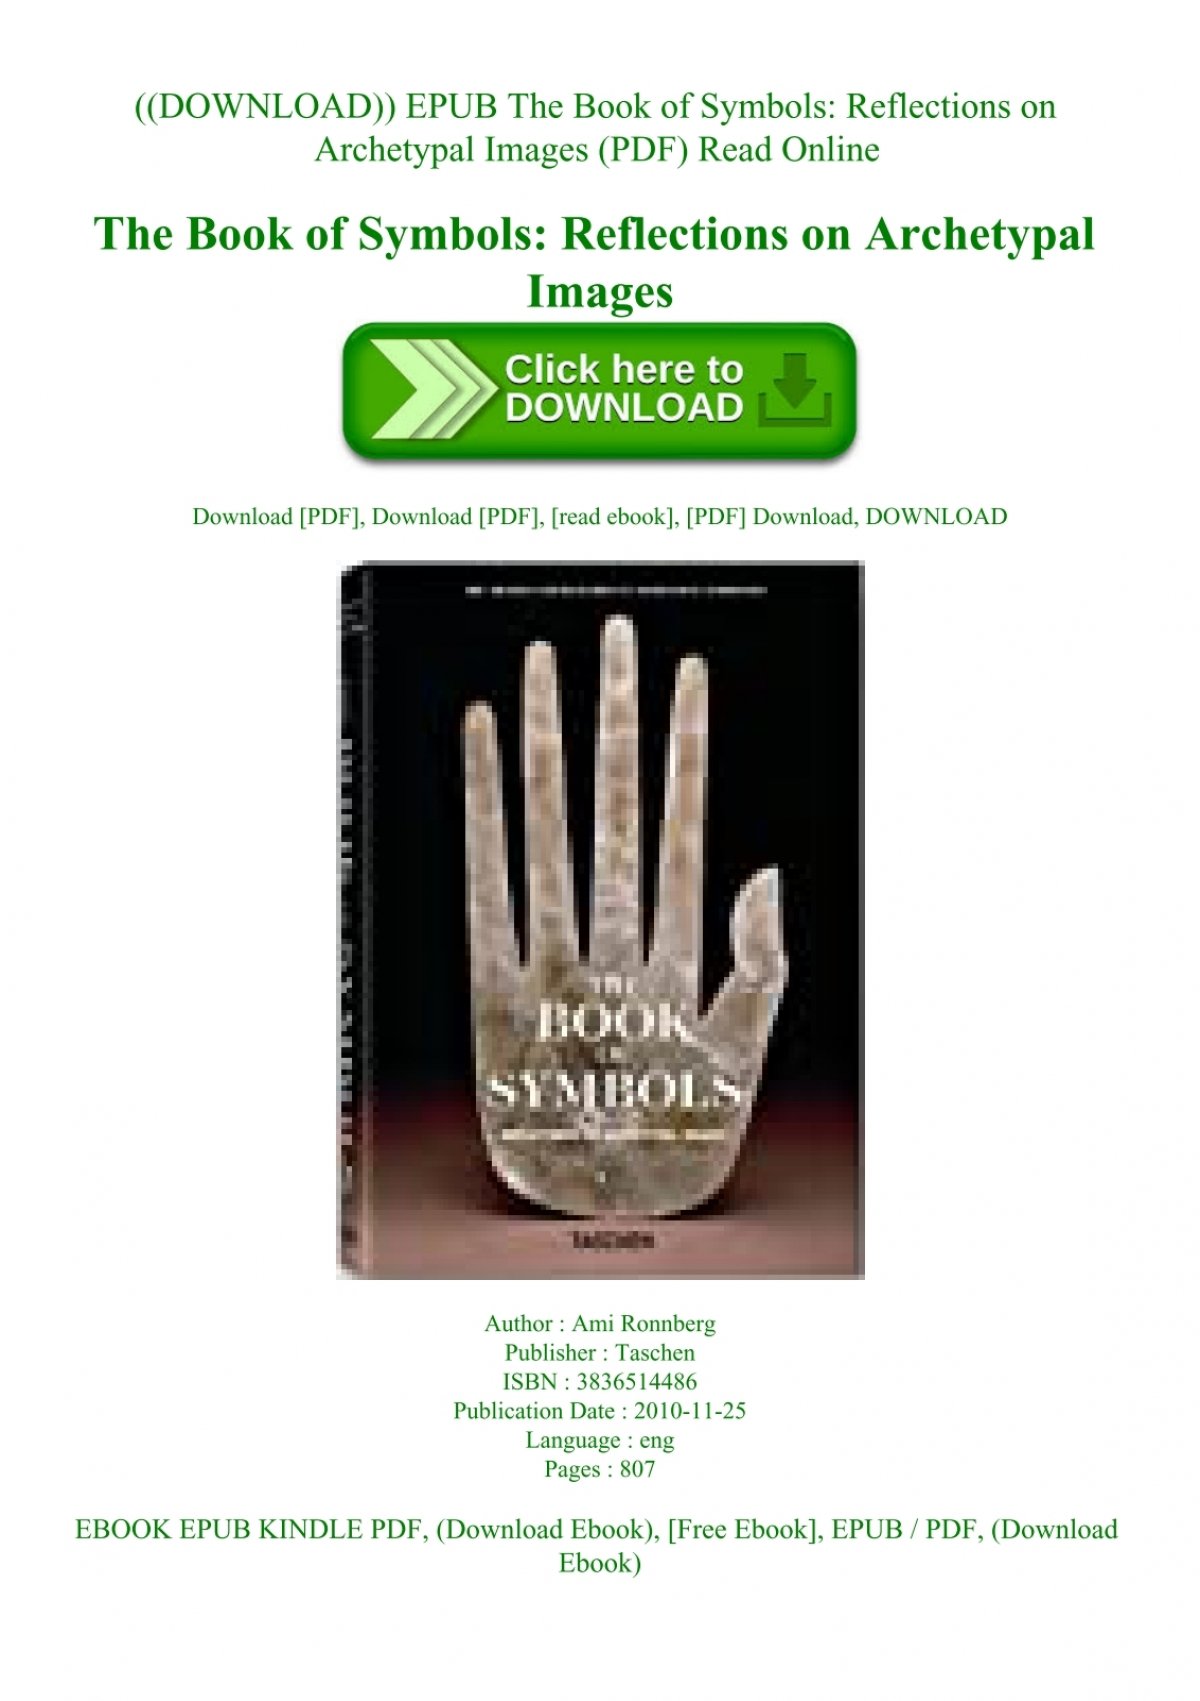 Download Epub The Book Of Symbols Reflections On Archetypal Images Pdf Read Online